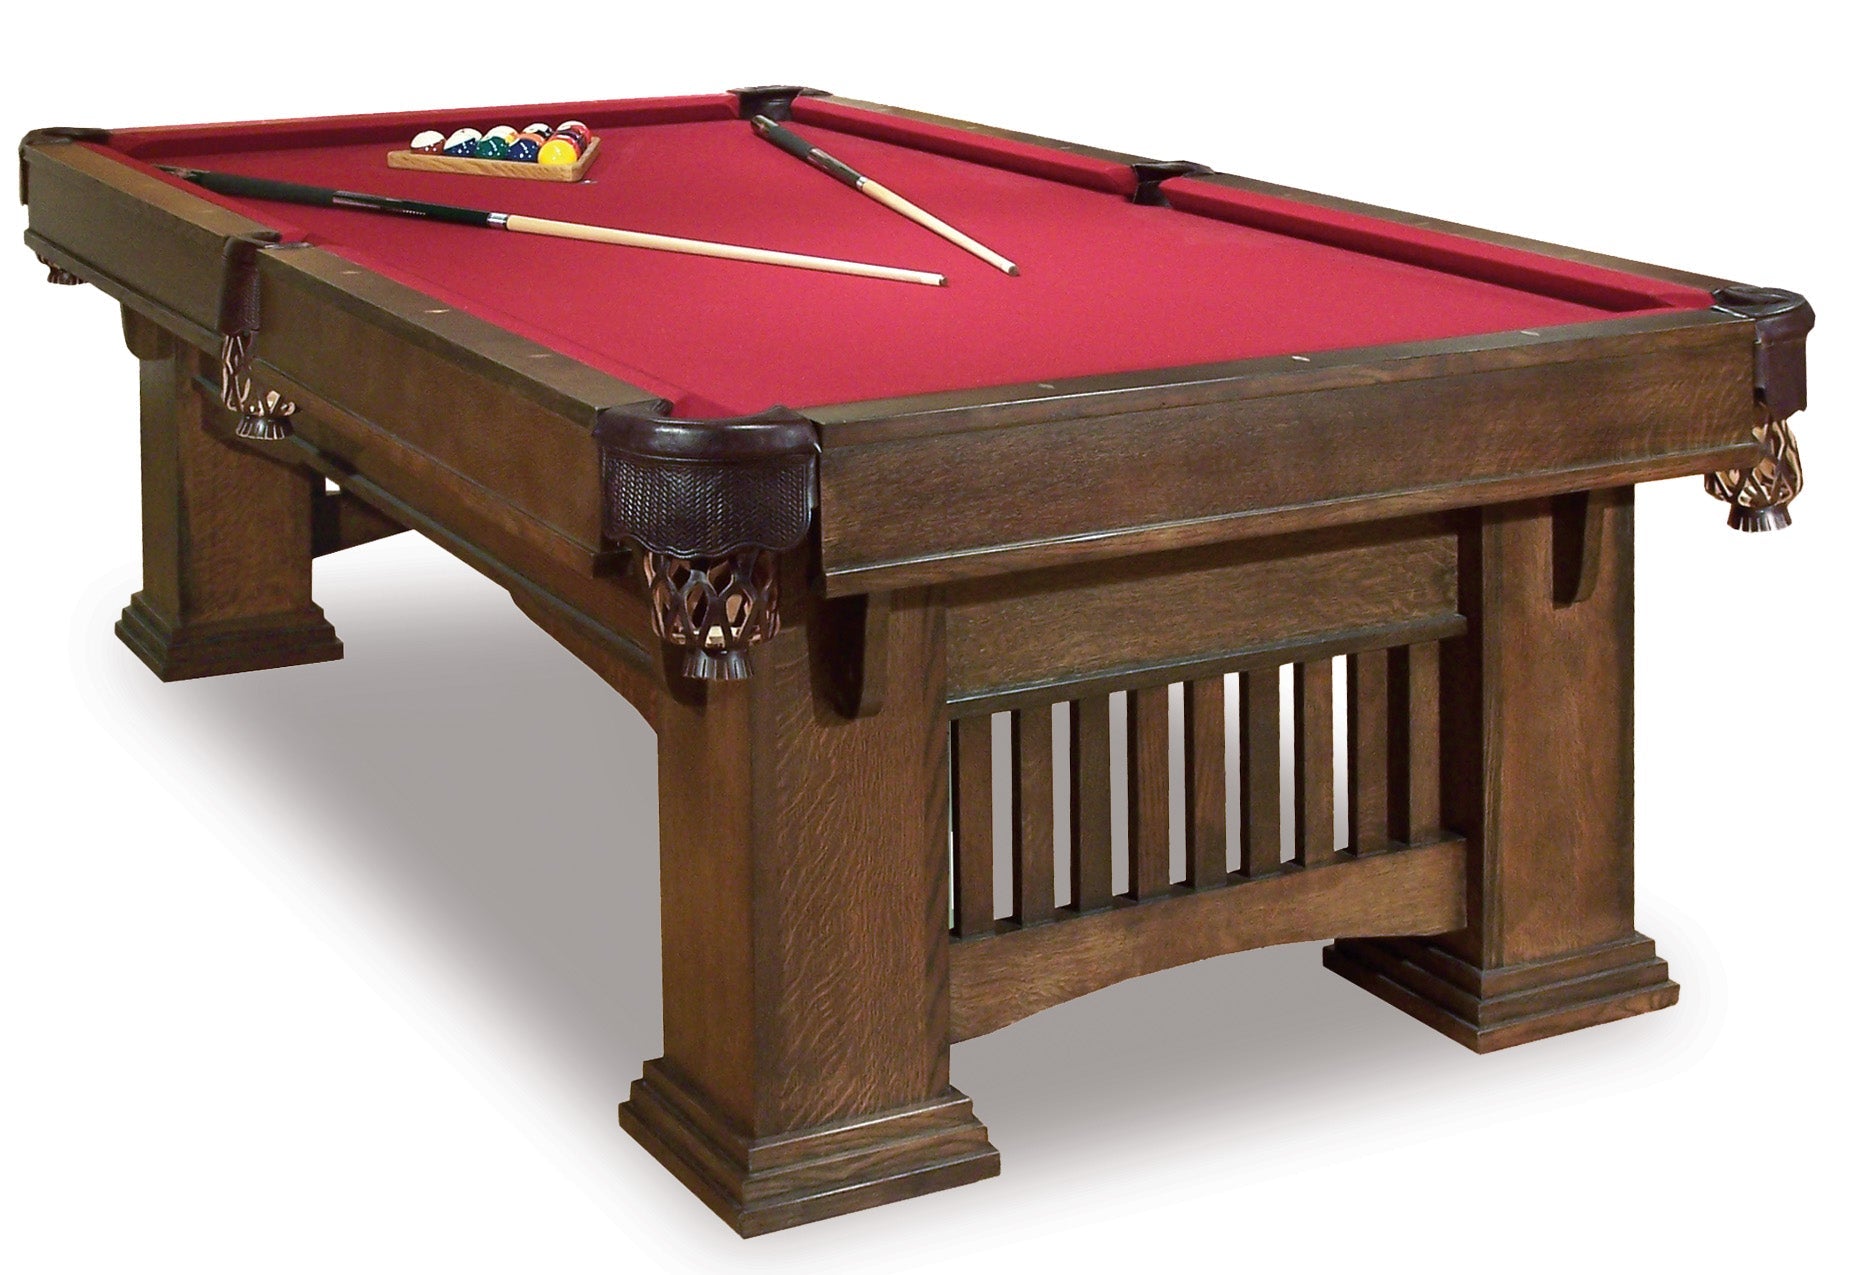 9' Hand-crafted Classic Mission Pool Table (Brown Maple)